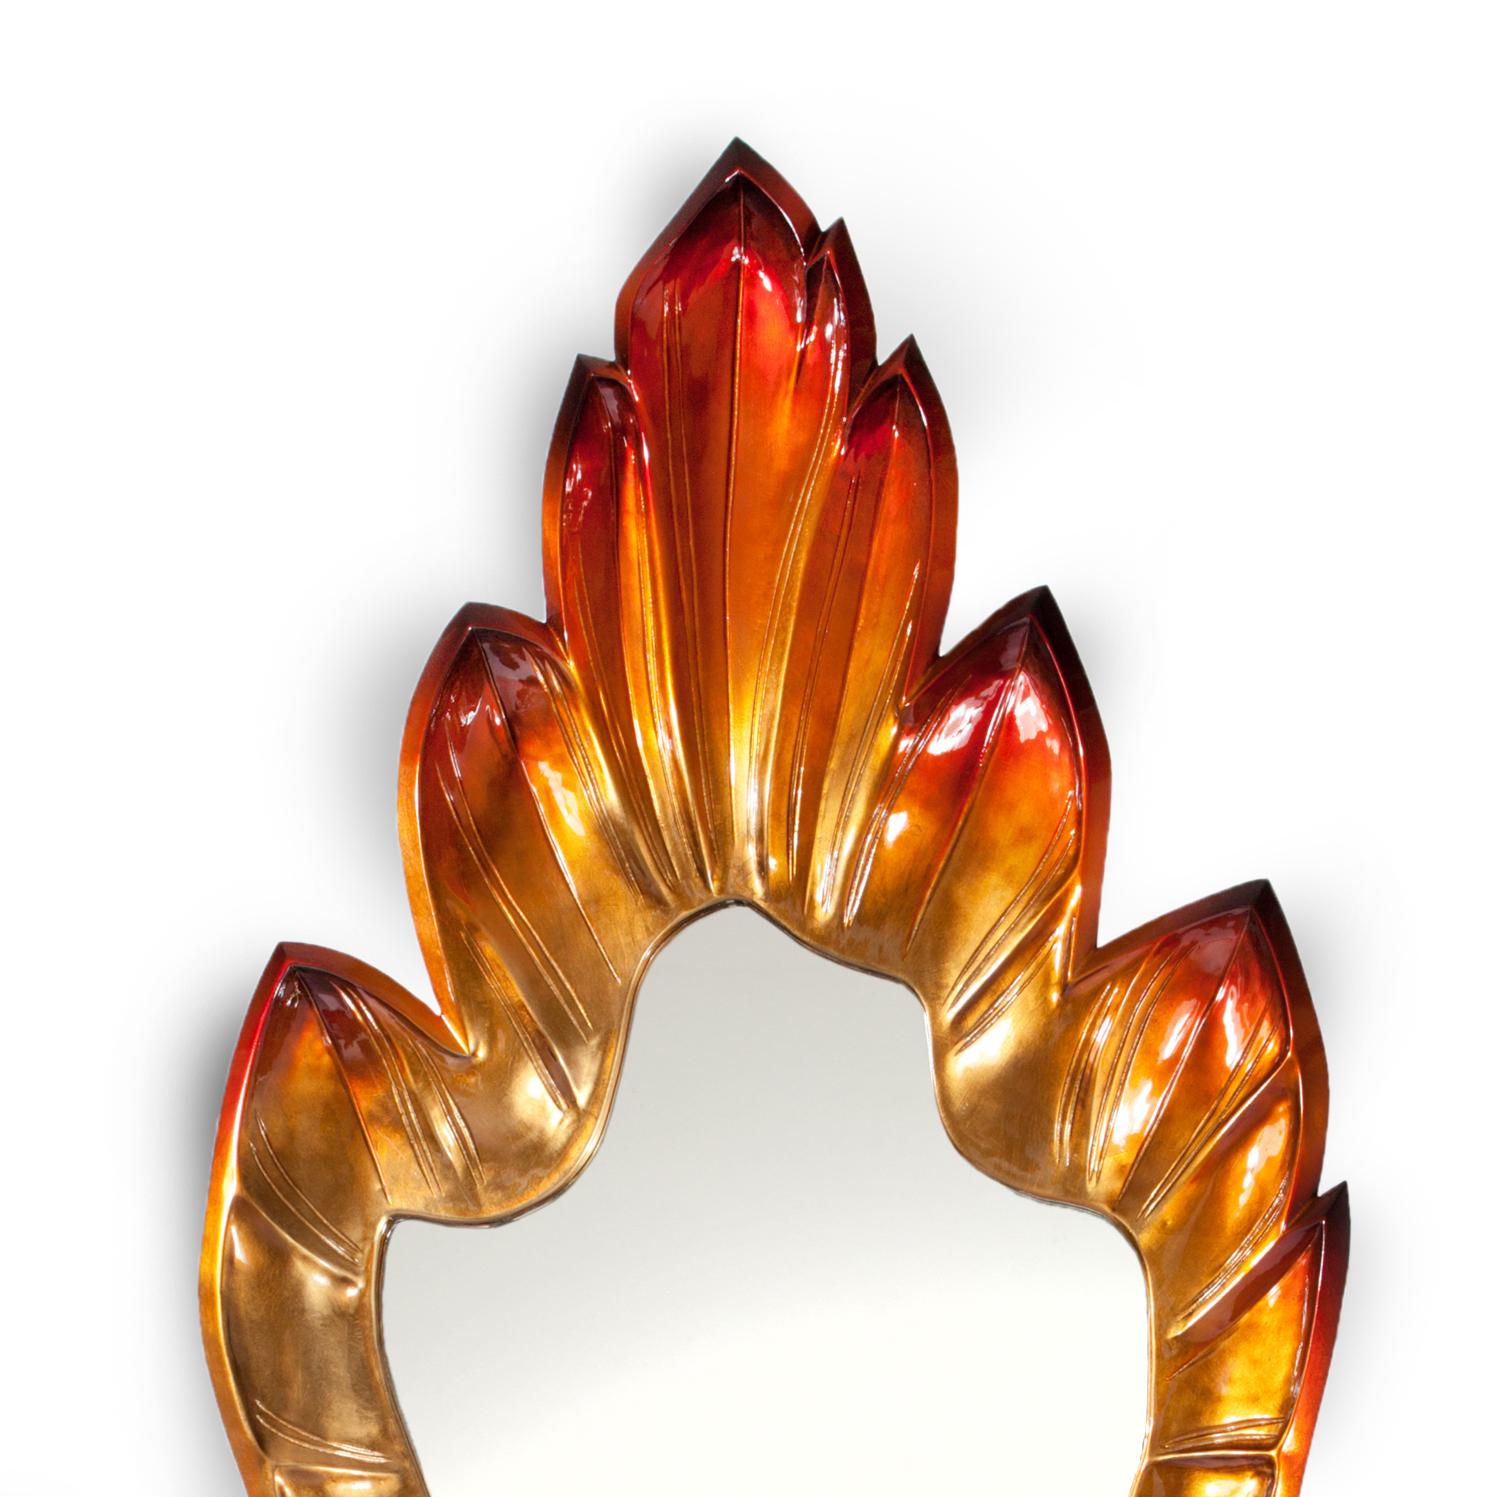 This special edition is a huge hand carved piece that shows the ability of creating bespoke pieces by the InsidherLand team of Portuguese artisans.
The natural aging revealed by the broken tips of the leaf is created by the hand carved structure